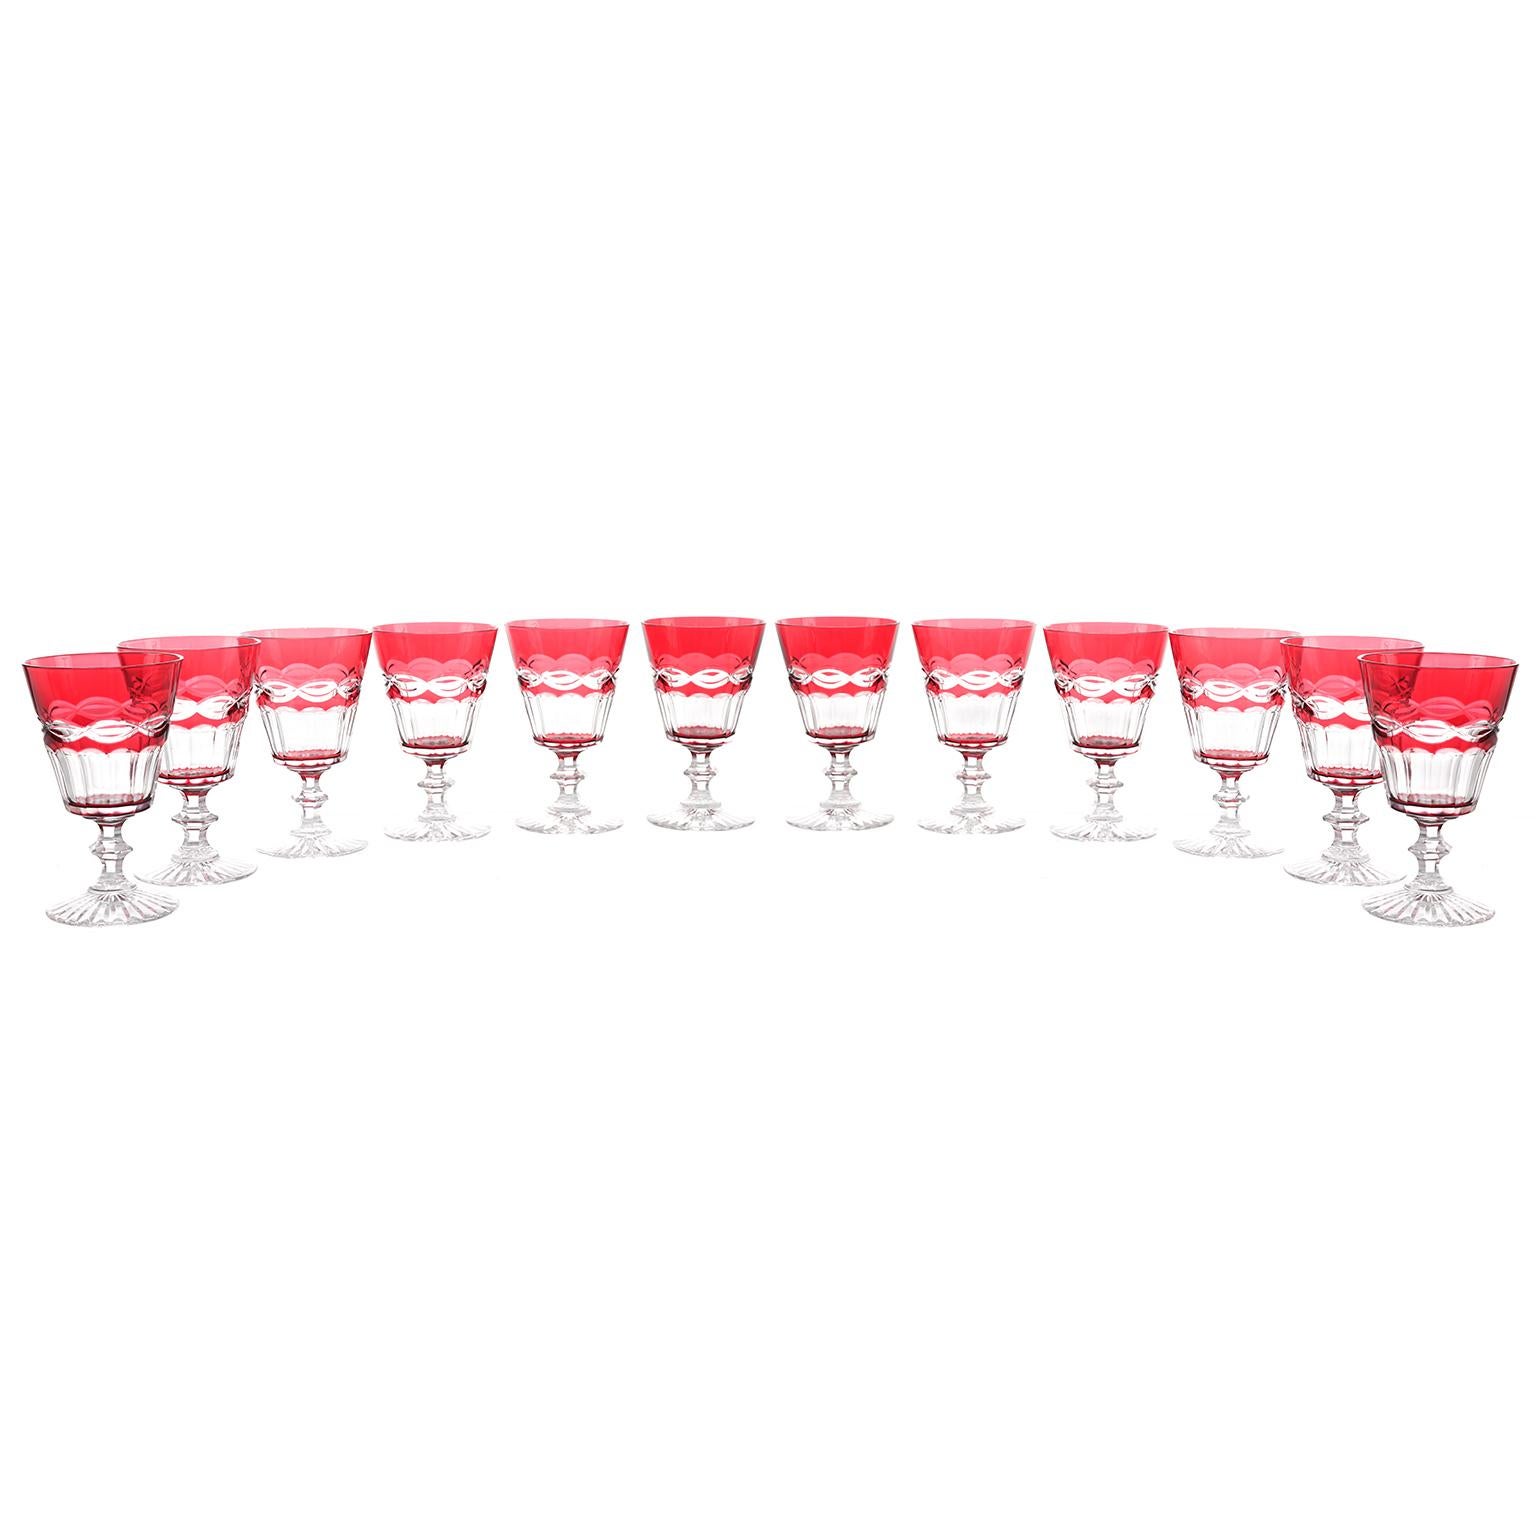 St. Louis, France, circa 1920s. These 12 crystal goblets by the legendary Saint Louis of France are beautiful. Perfect for everyday or entertaining and just right for water or wine, the bright cranberry color flawlessly completes the visual